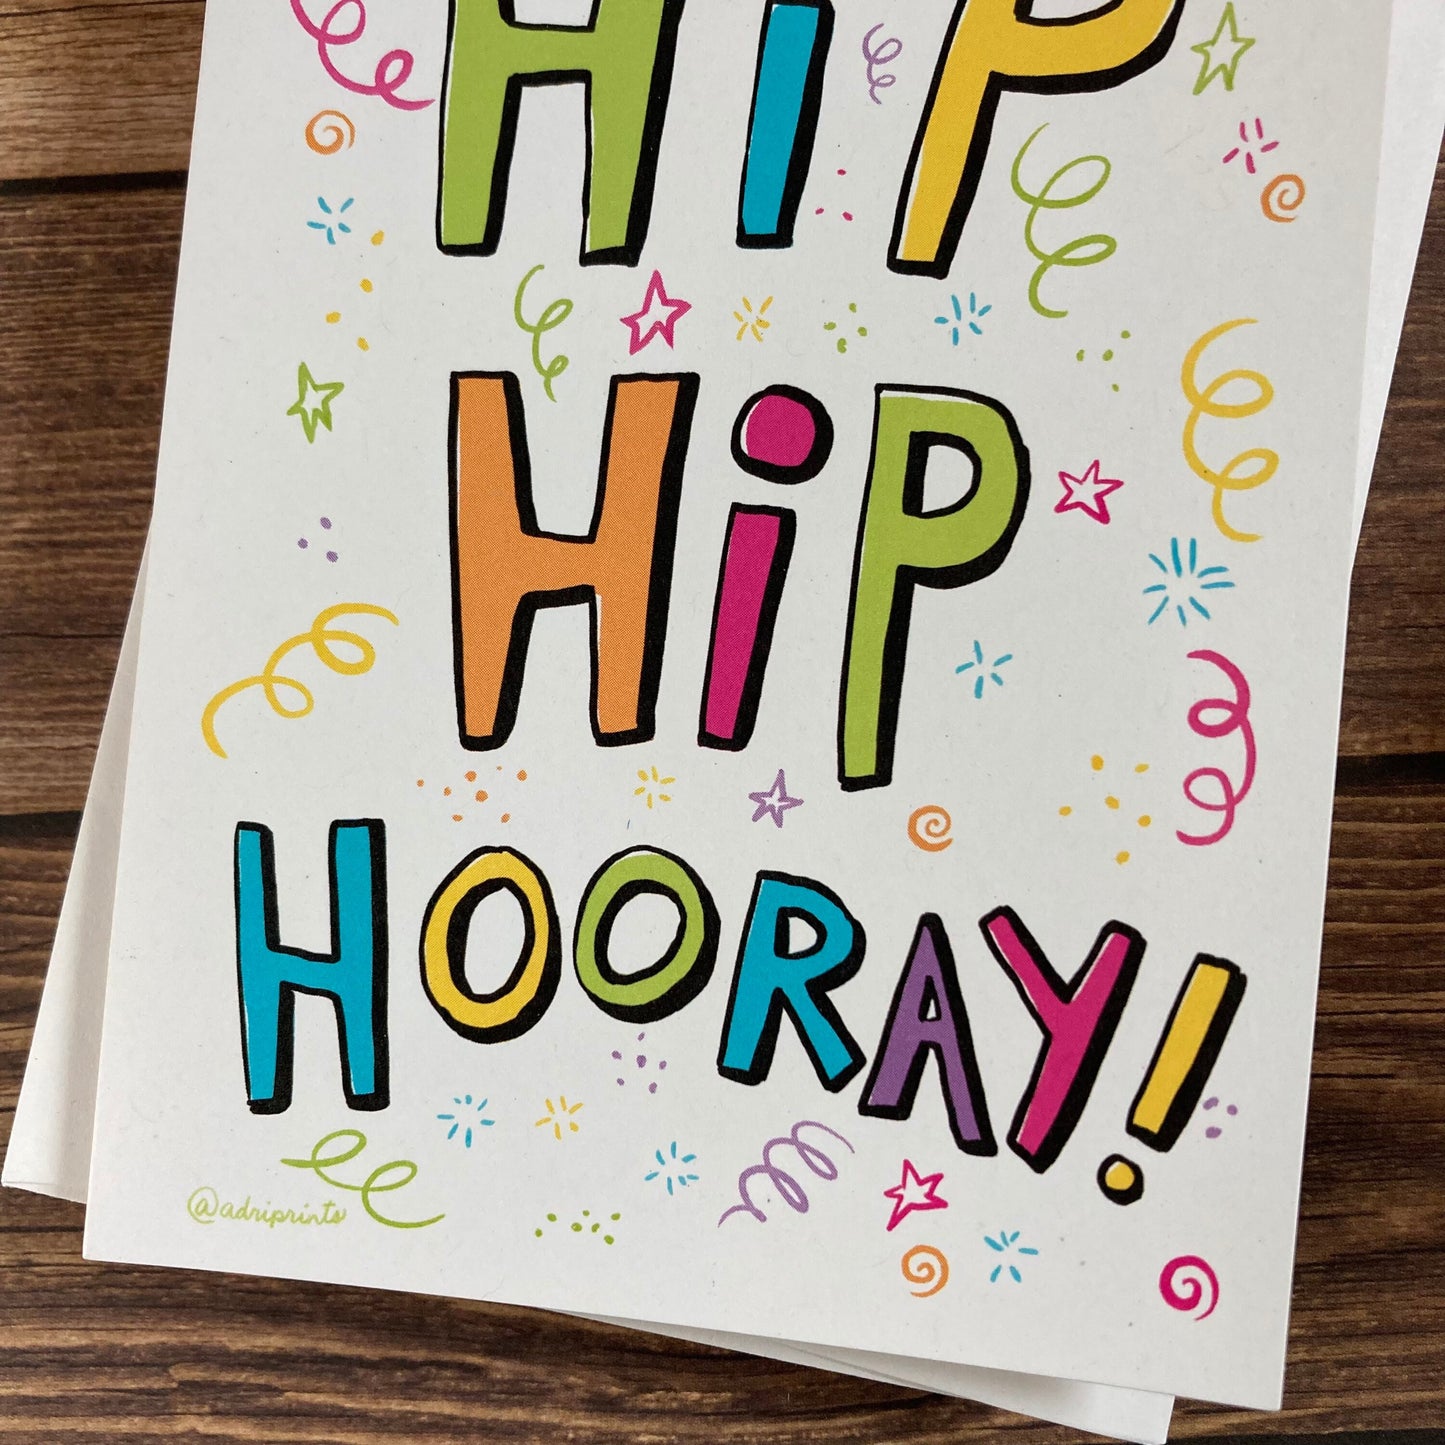 EVERYDAY - Hip Hip Hooray! - Happy Graduation, Celebrate, Accomplishment Card featuring Lettering by Adriana Bergstrom